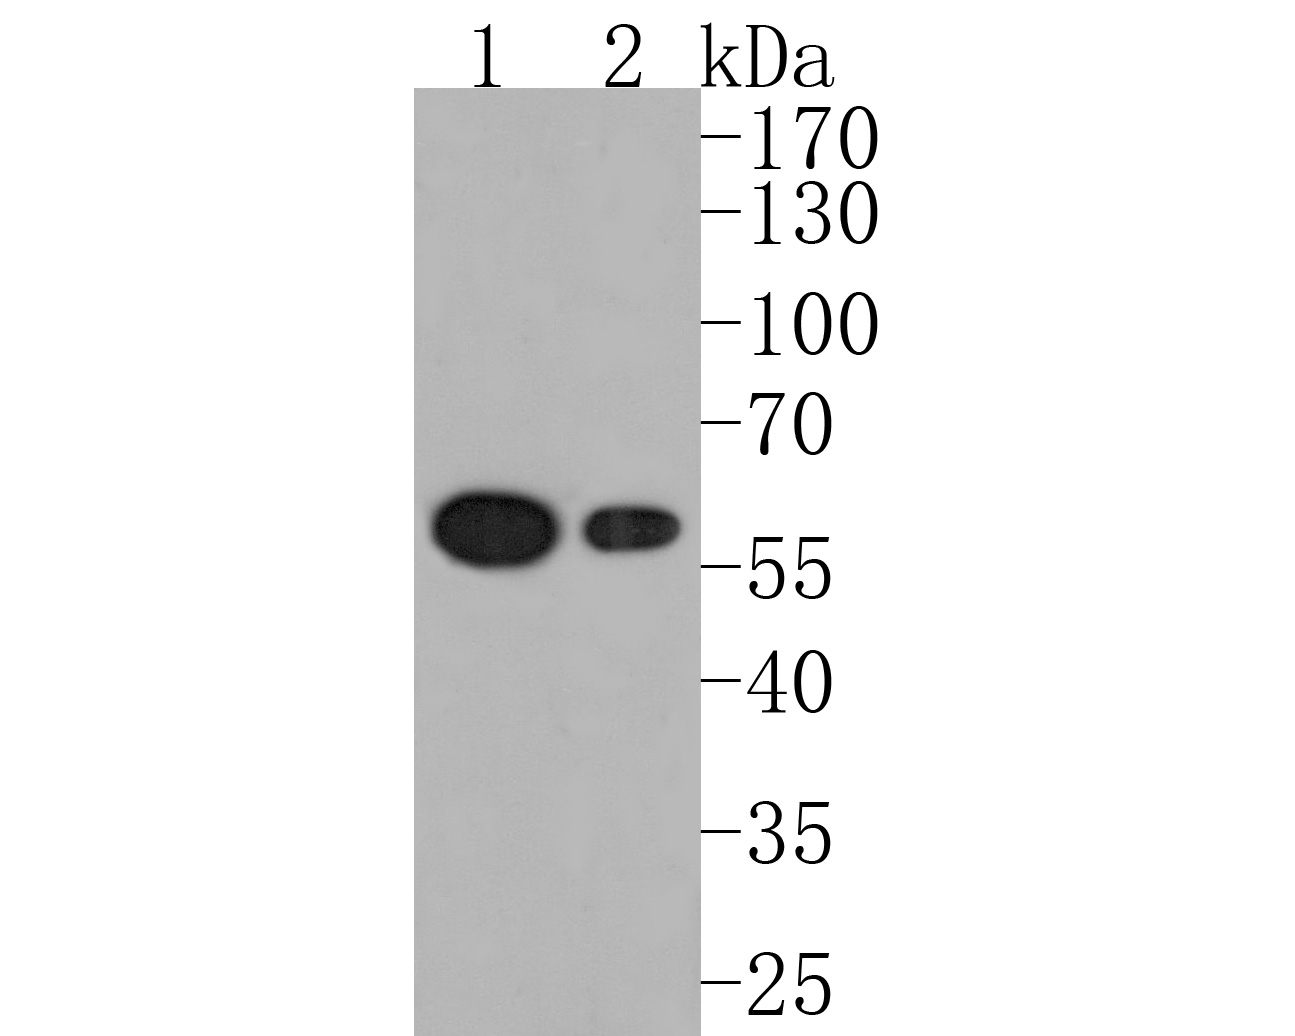 Western blot analysis of PDCD7 on different lysates. Proteins were transferred to a PVDF membrane and blocked with 5% BSA in PBS for 1 hour at room temperature. The primary antibody (HA720033, 1/500) was used in 5% BSA at room temperature for 2 hours. Goat Anti-Rabbit IgG - HRP Secondary Antibody (HA1001) at 1:200,000 dilution was used for 1 hour at room temperature.<br />
Positive control: <br />
Lane 1: Jurkat cell lysate<br />
Lane 2: Hela cell lysate